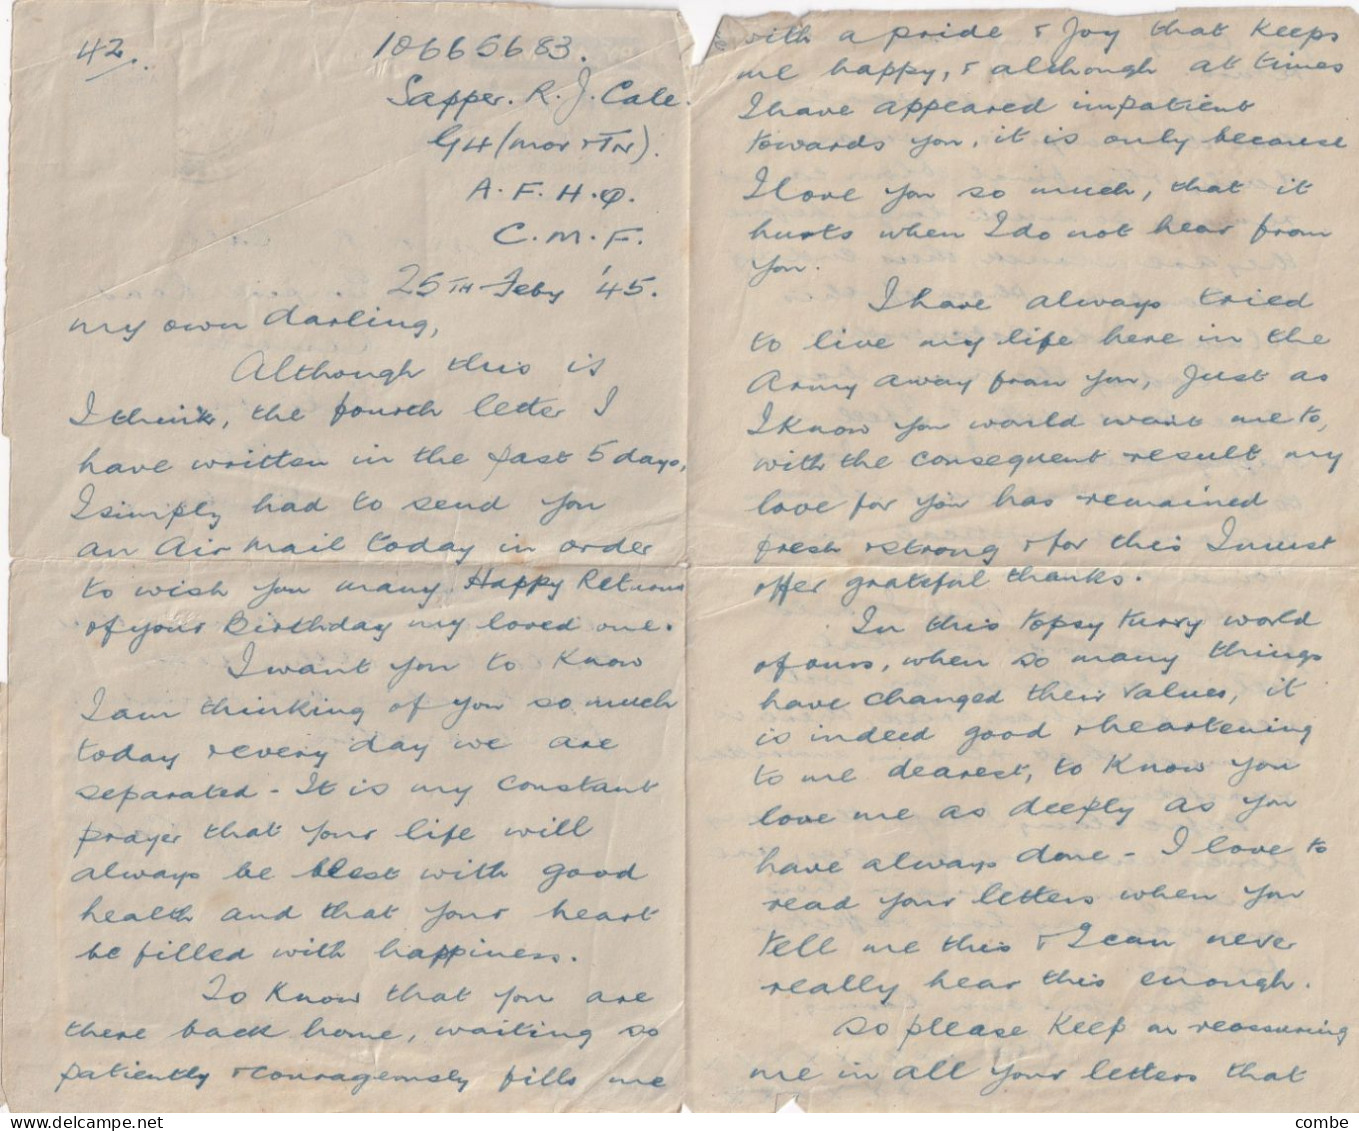 AIR LETTER. GB. FIELD POST OFFICE 751. 25 FEB 45. CASERTA. ITALY. CENSORED - Militares